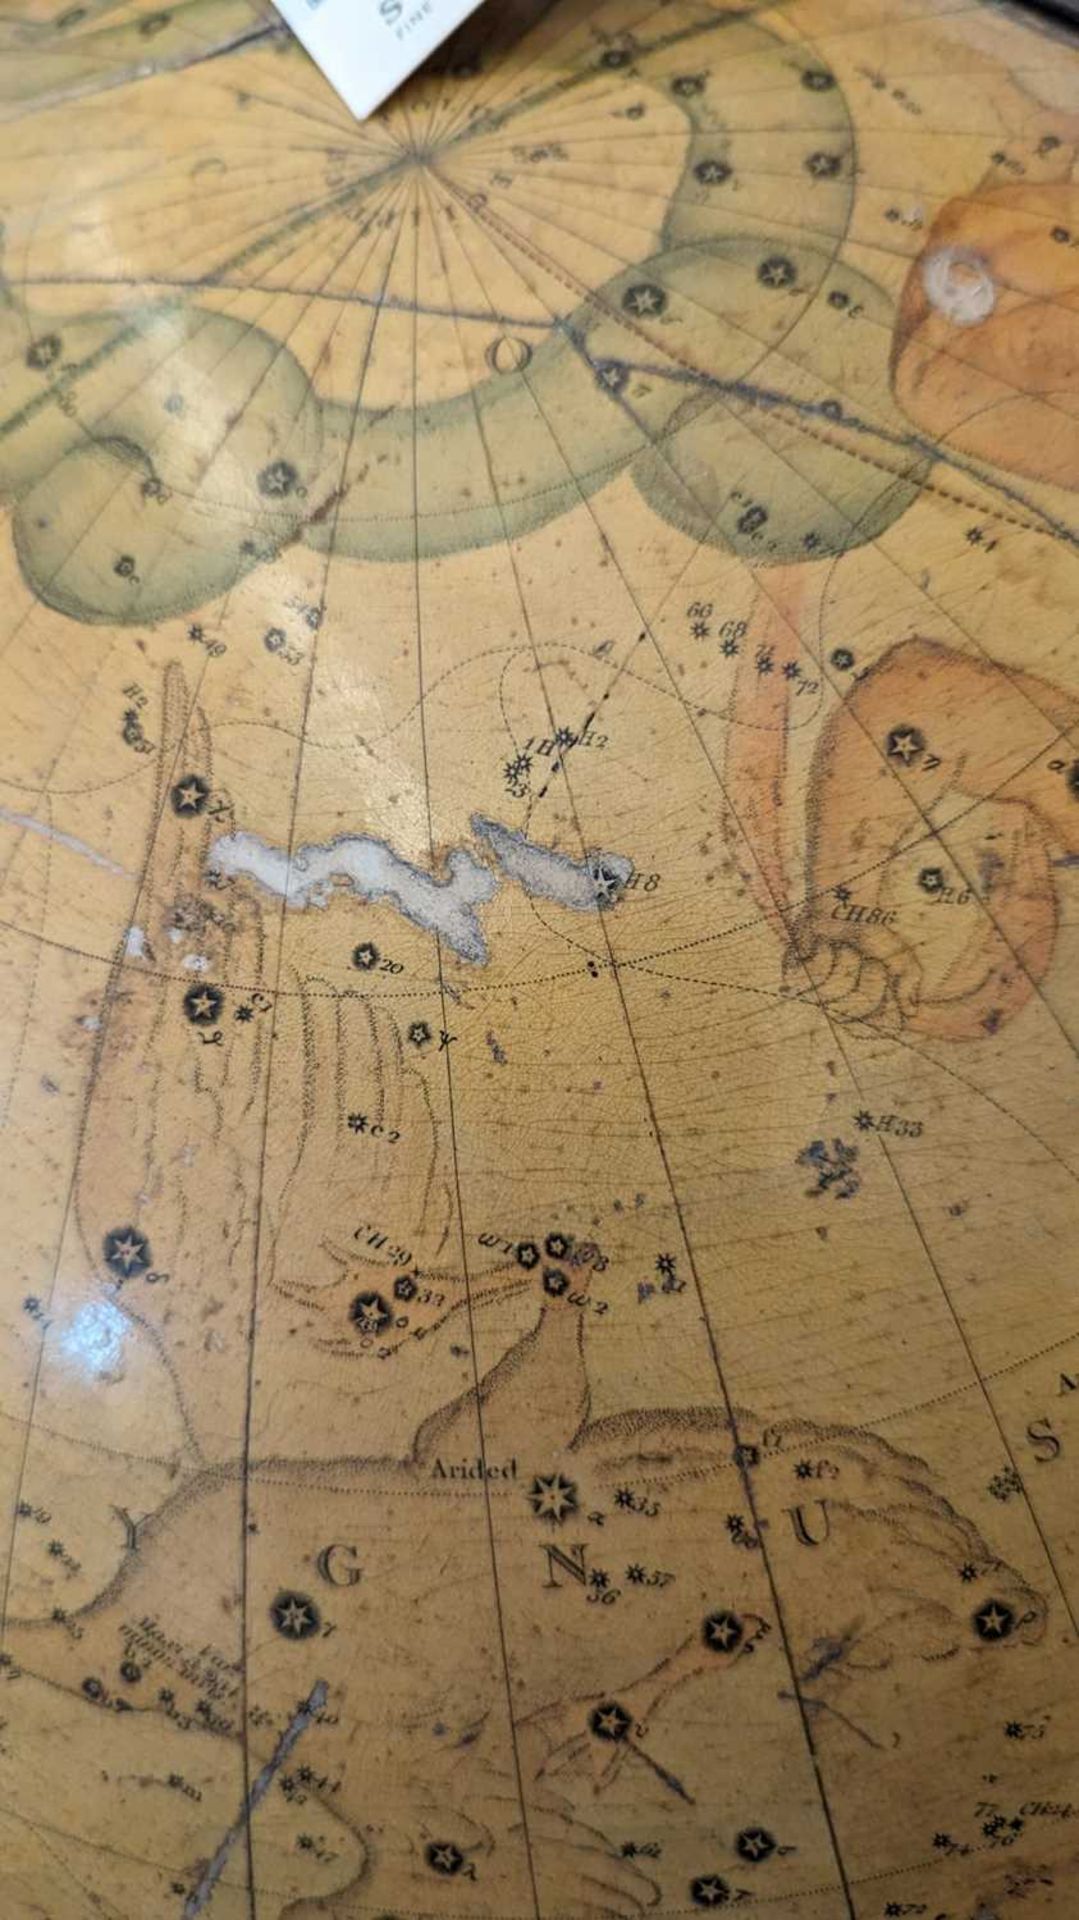 A large celestial library globe by J & W Cary, - Image 58 of 84